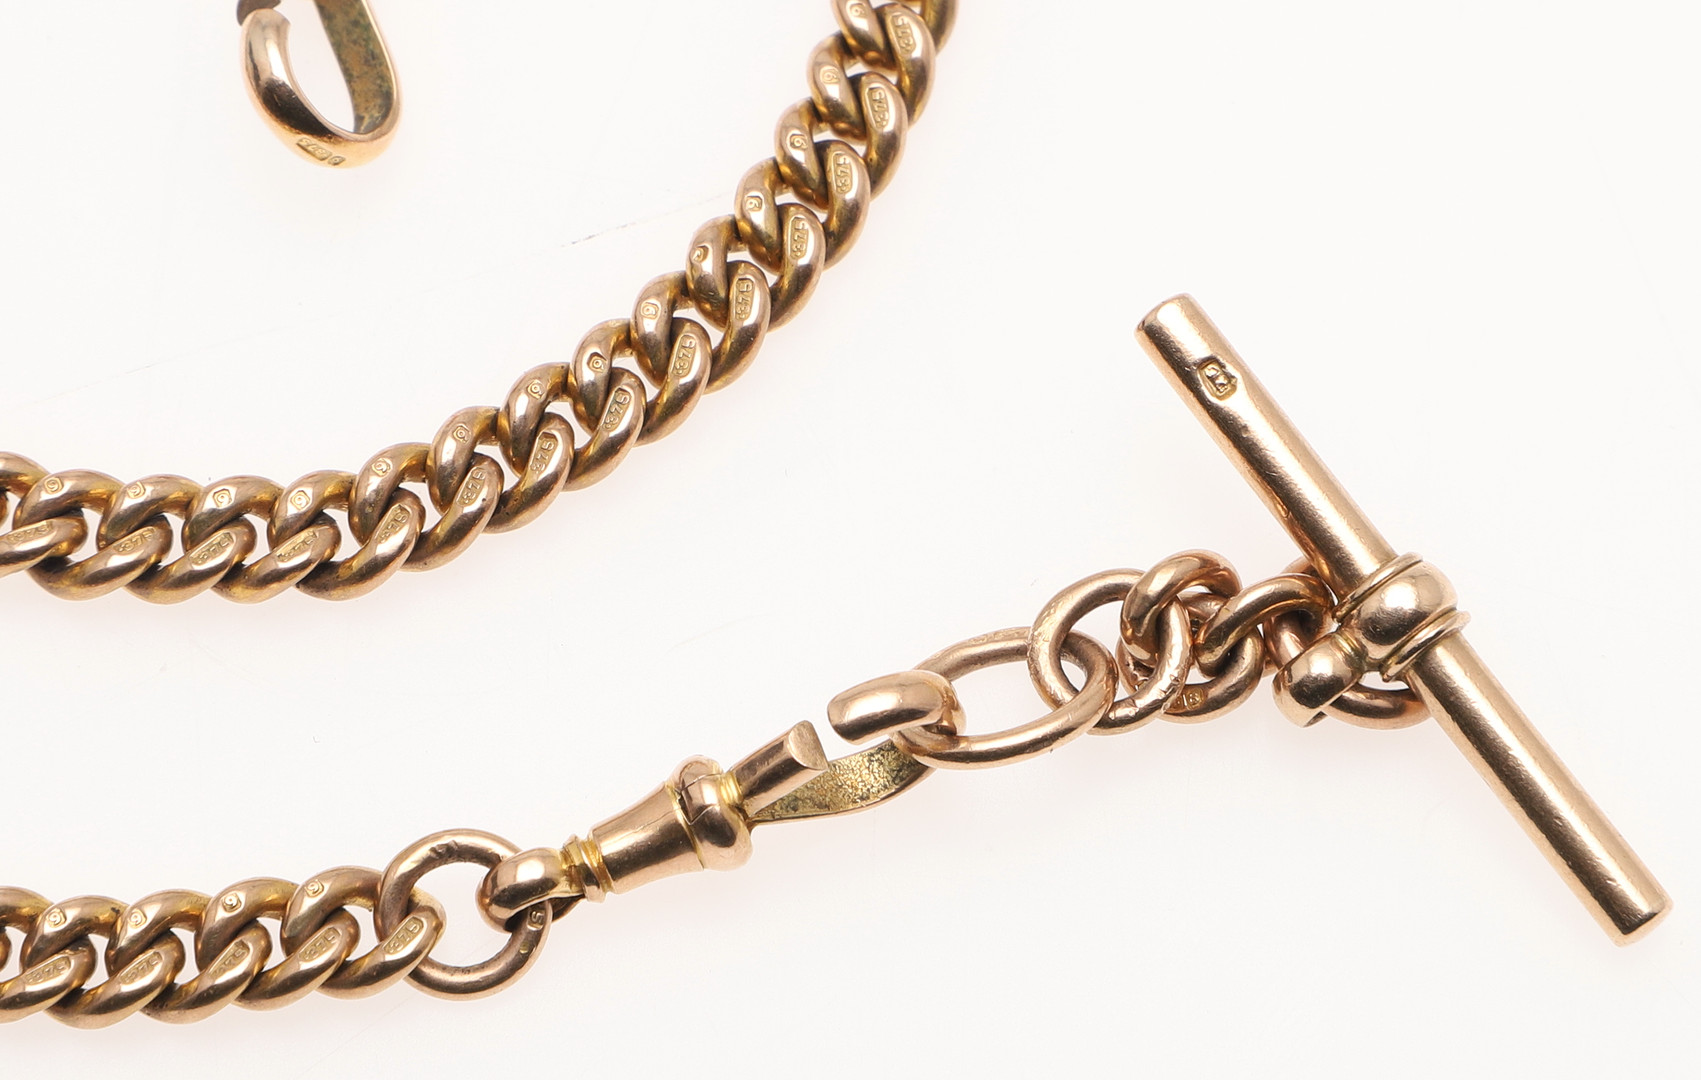 A 9CT GOLD CURB LINK WATCHCHAIN. - Image 2 of 3